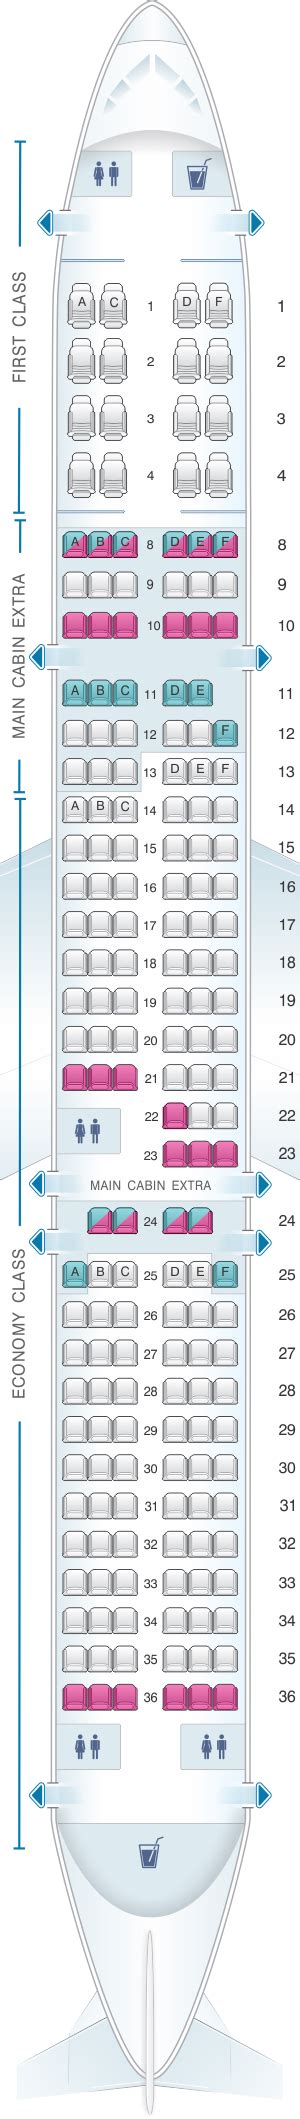 Airbus a321 american airlines seat map. Seats. airline_seat_recline_normal. Standard seat. 18". Seat width. 31". Pitch. The economy cabin on American Airlines's A320 features 138 standard seats in a 3-3 configuration. wifi. 